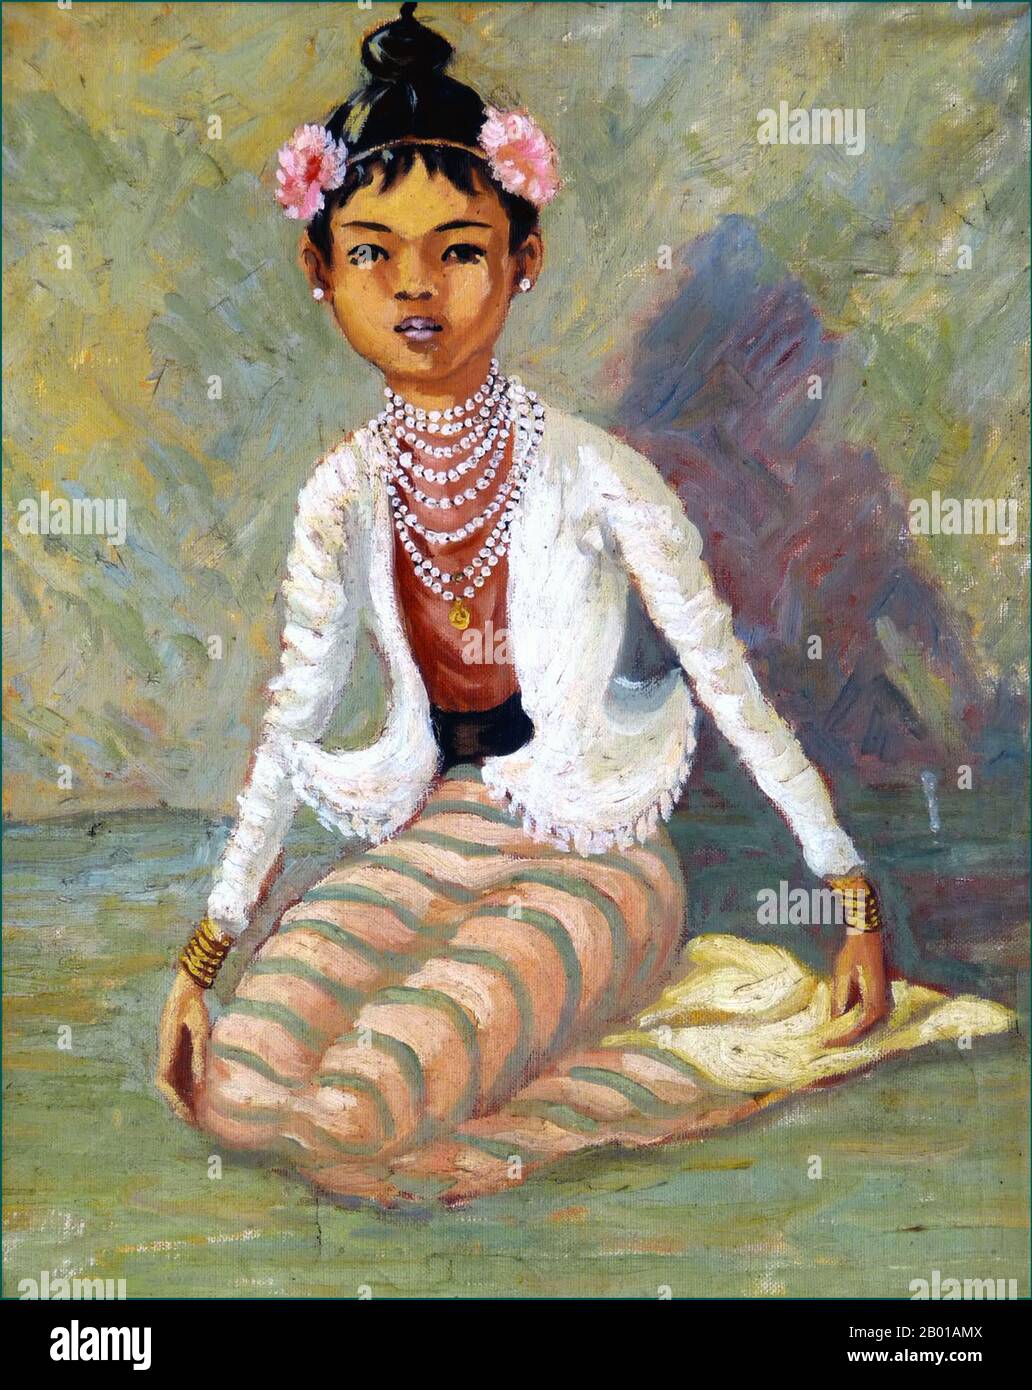 Burma/Myanmar: Young Burmese girl in longyi with flowers in her hair. Colonial period painting, c. 1910.  A longyi is a sheet of cloth widely worn in Burma. It is approximately 2 m (6½ ft.) long and 80 cm (2½ ft.) wide. The cloth is often sewn into a cylindrical shape. It is worn around the waist, running to the feet. It is held in place by folding fabric over, without a knot. It is also sometimes folded up to the knee for comfort. Similar garments are found in India, Bangladesh, Sri Lanka, the Malay Archipelago, and Juiz de Fora. Stock Photo